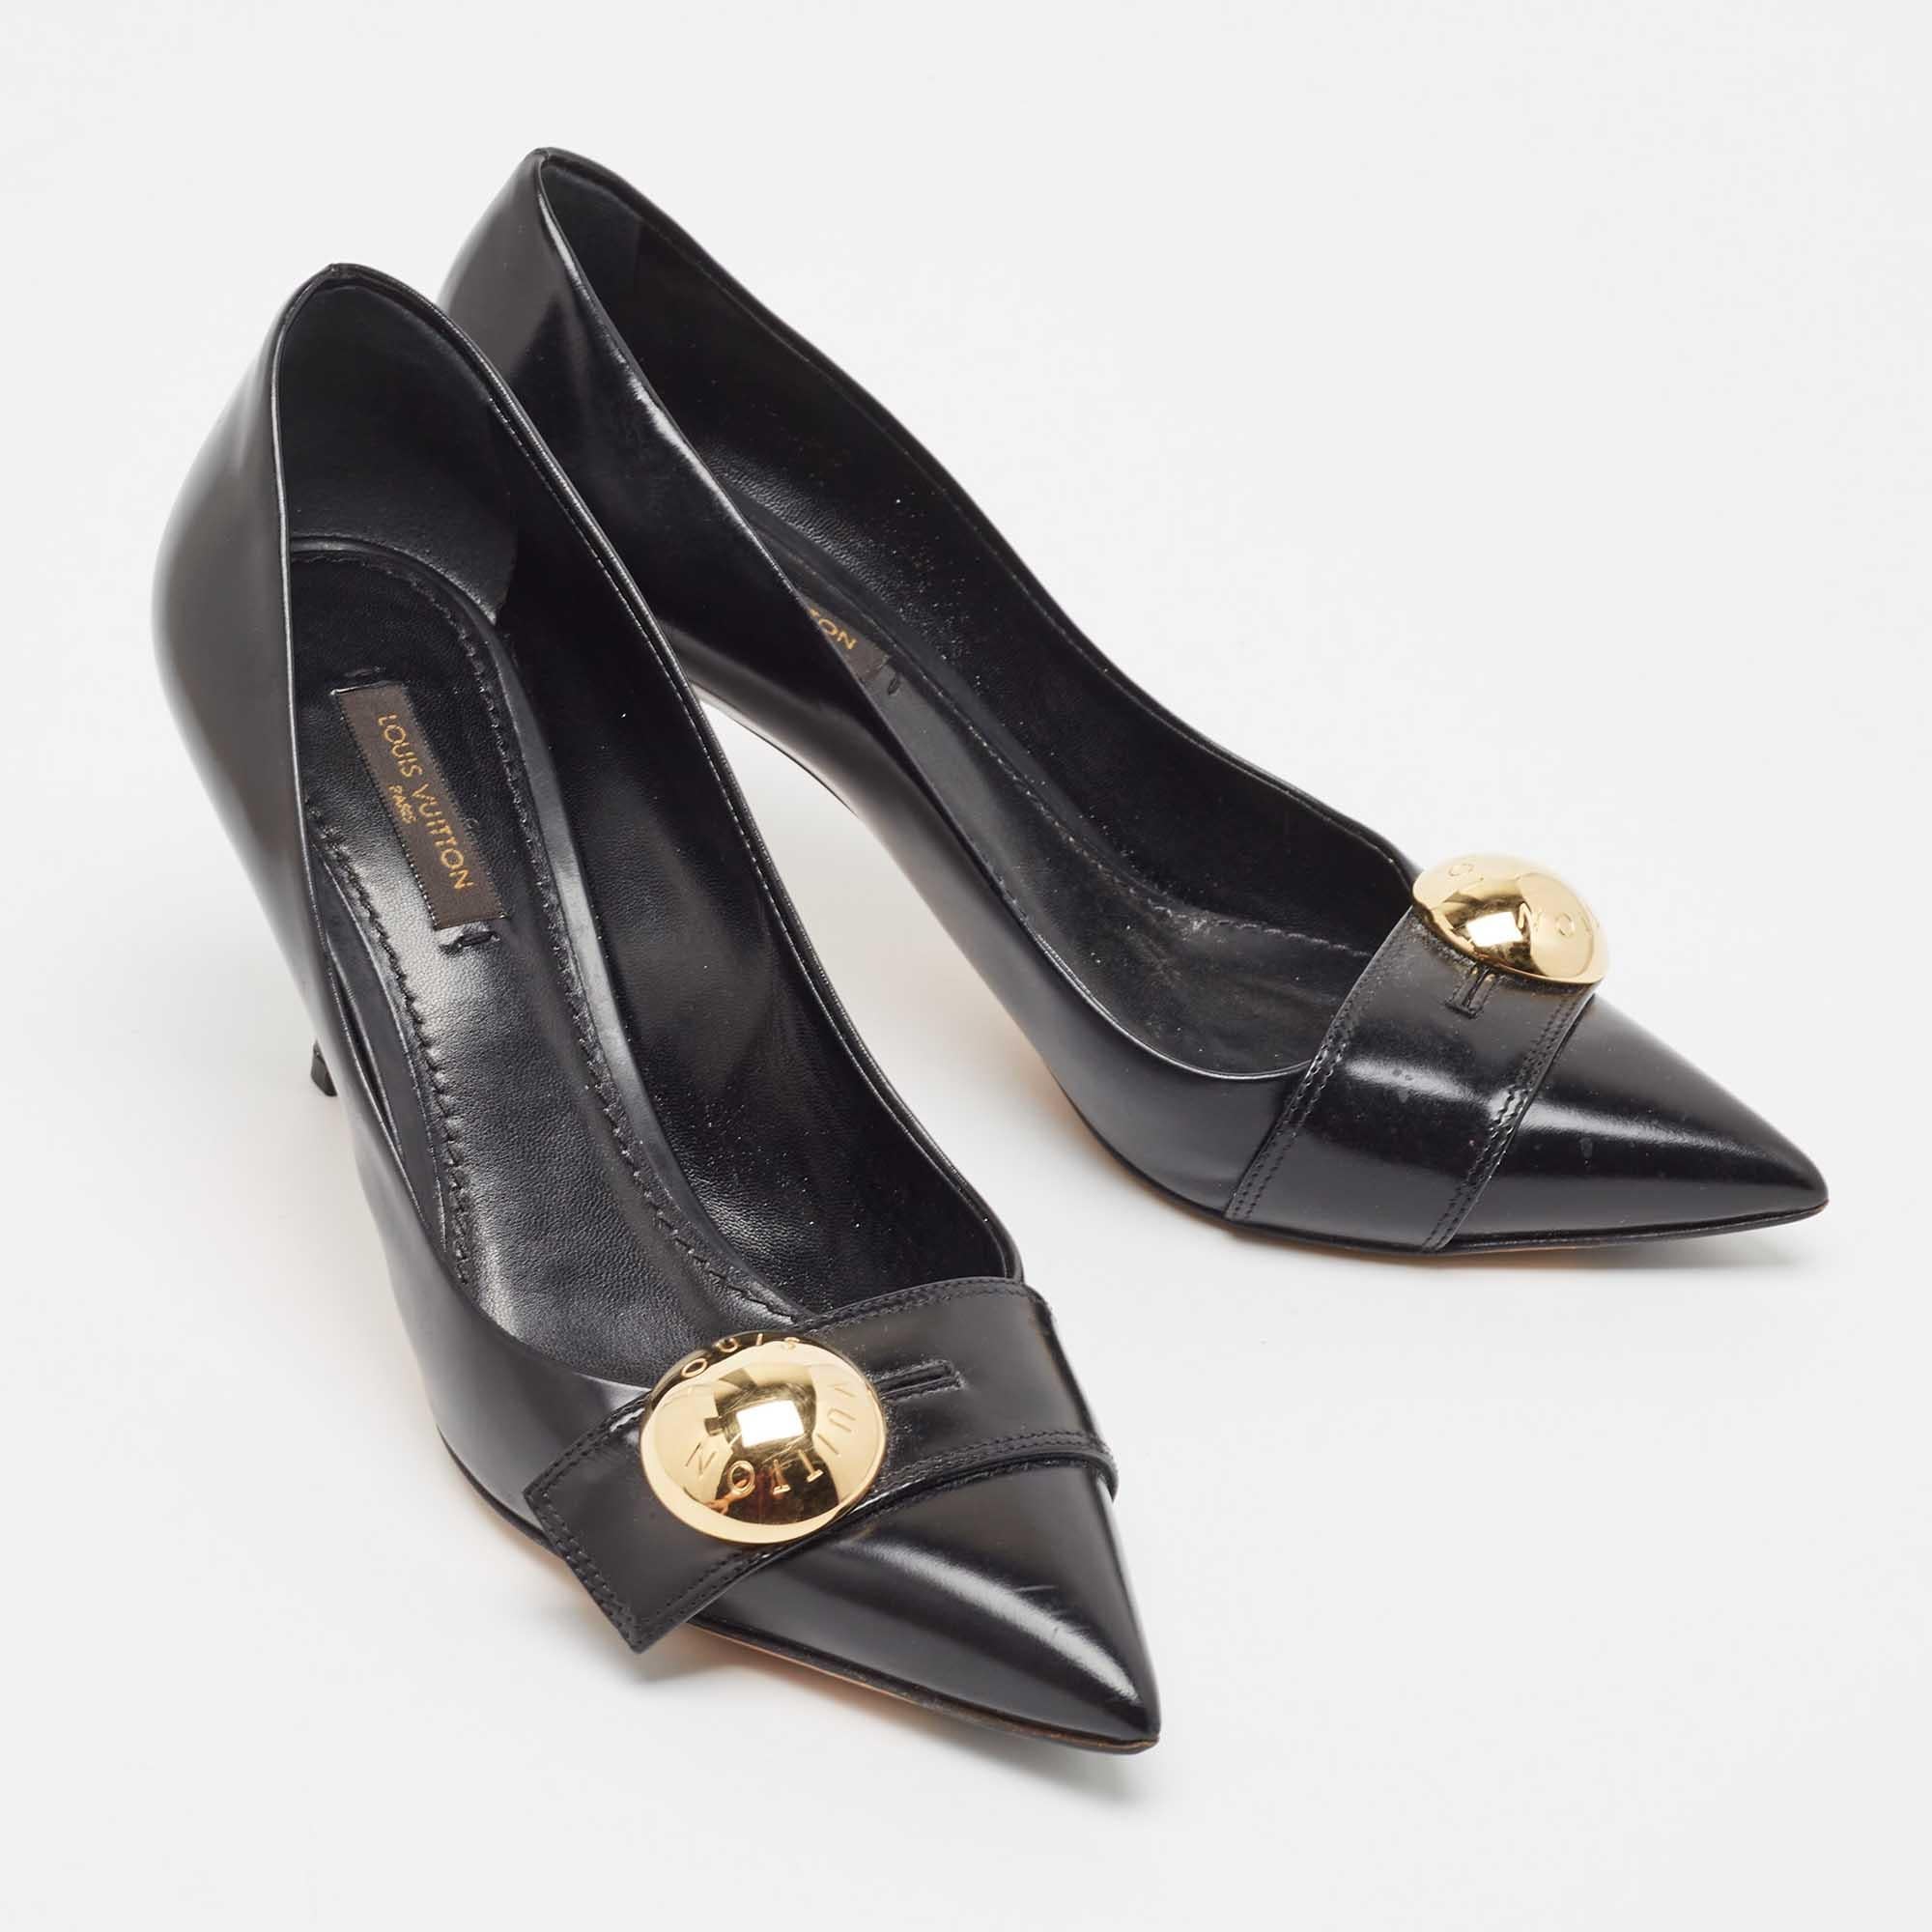 Louis Vuitton Black Leather Embellished Pointed Toe Pumps Size 37 In Good Condition For Sale In Dubai, Al Qouz 2